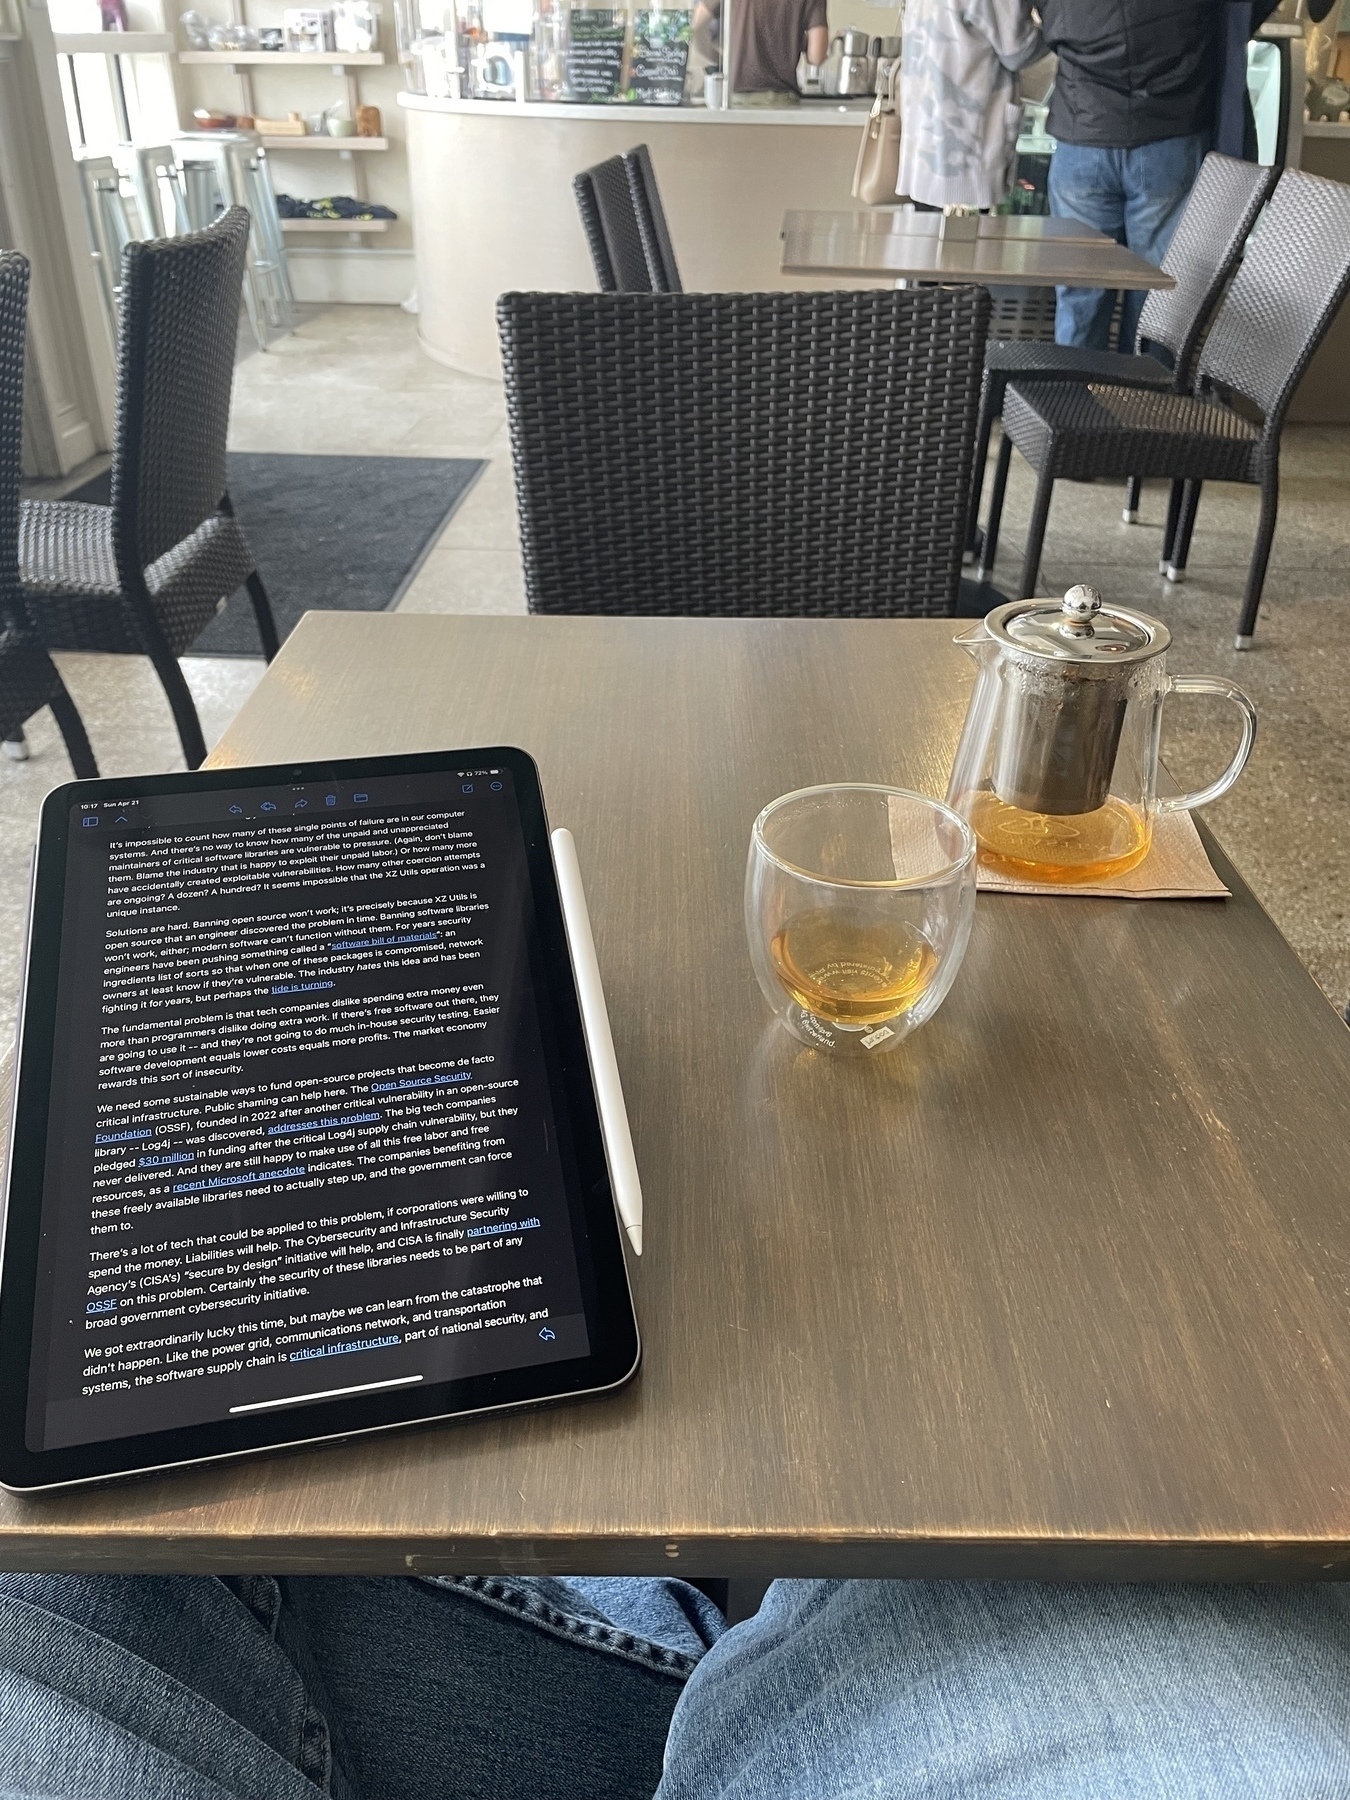 An iPad with text on the screen is angled towards the viewer on the left of a table. On the right, a nearly empty clear mug and tea sit. In the background, an empty chair faces the viewer on the opposite side of the table, and beyond that, more tables, chairs, and a cafe counter with people ordering. 